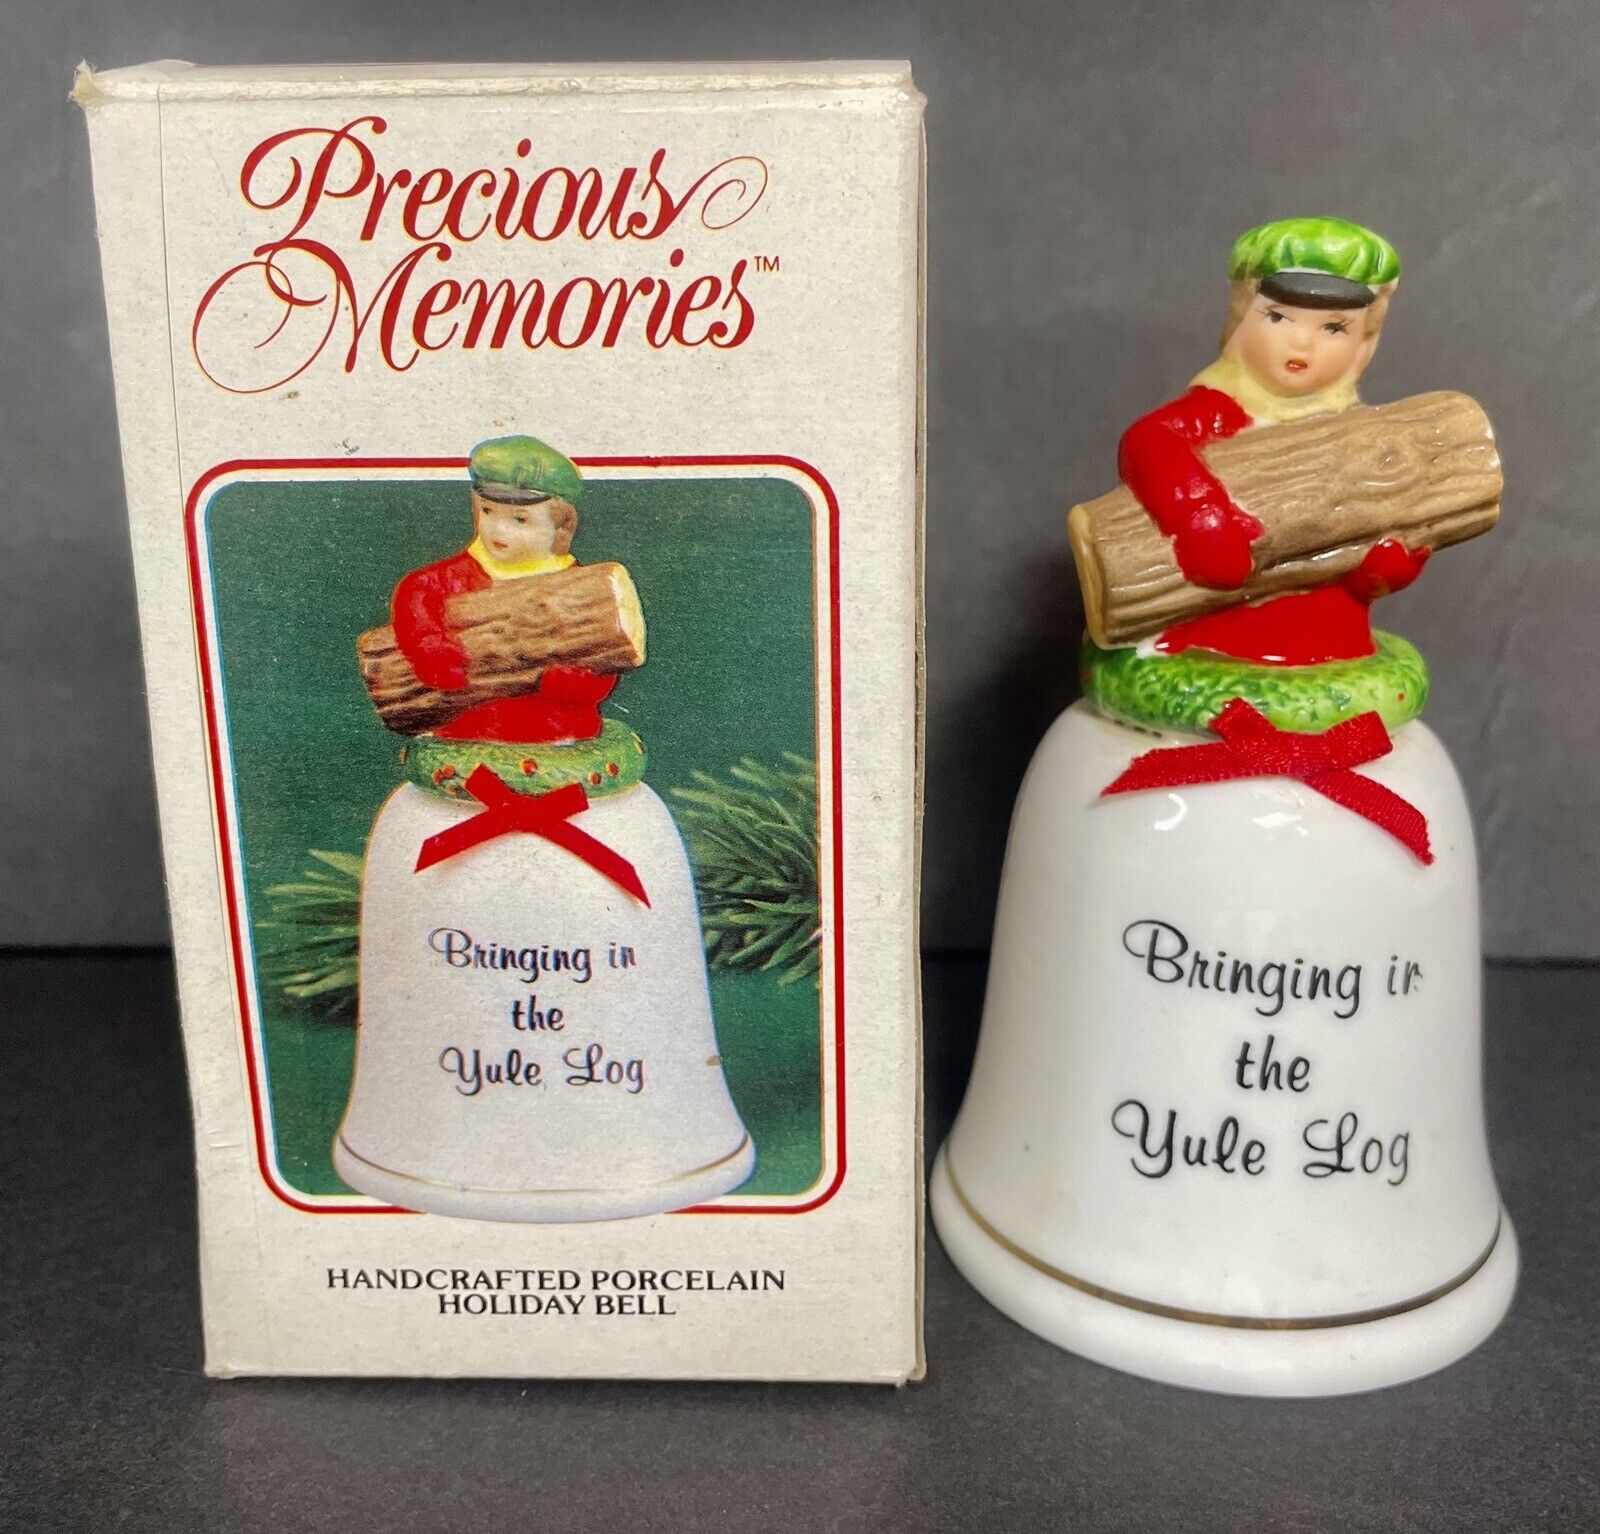 Precious Memories Handcrafted Porcelain Holiday Bell Bringing in the Yule Log